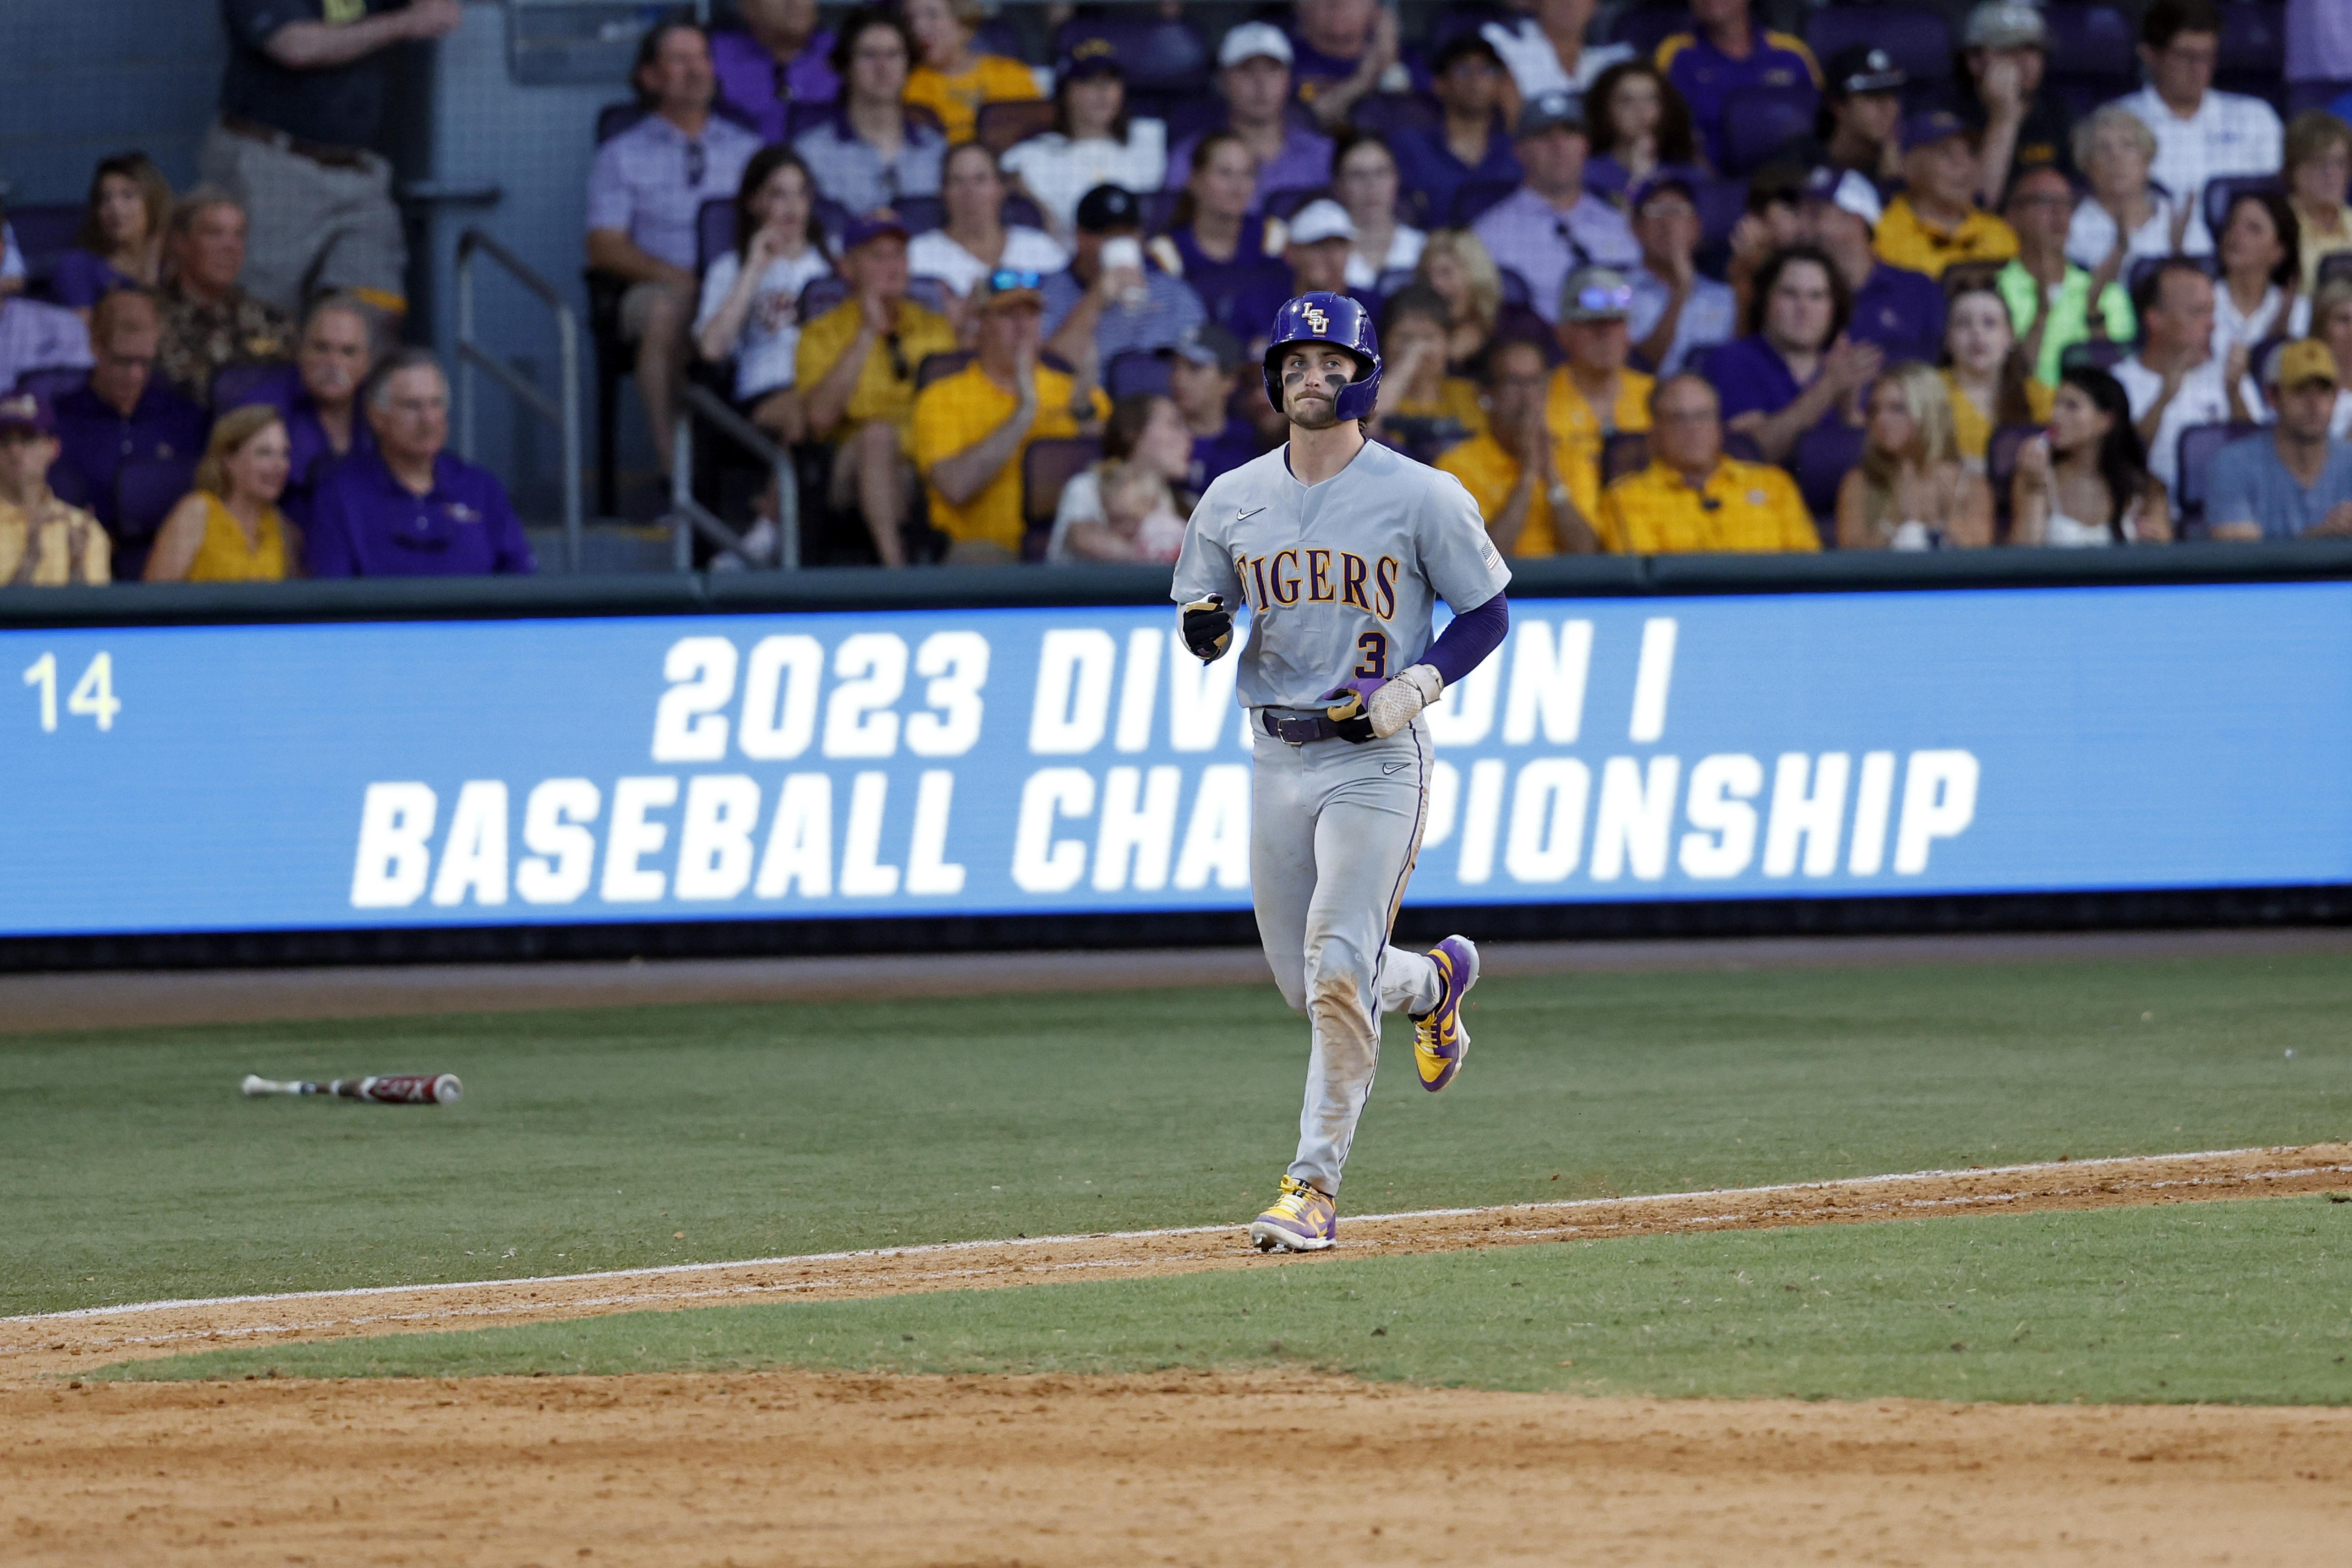 LSUs Dylan Crews wins Golden Spikes Award as the nations top baseball player